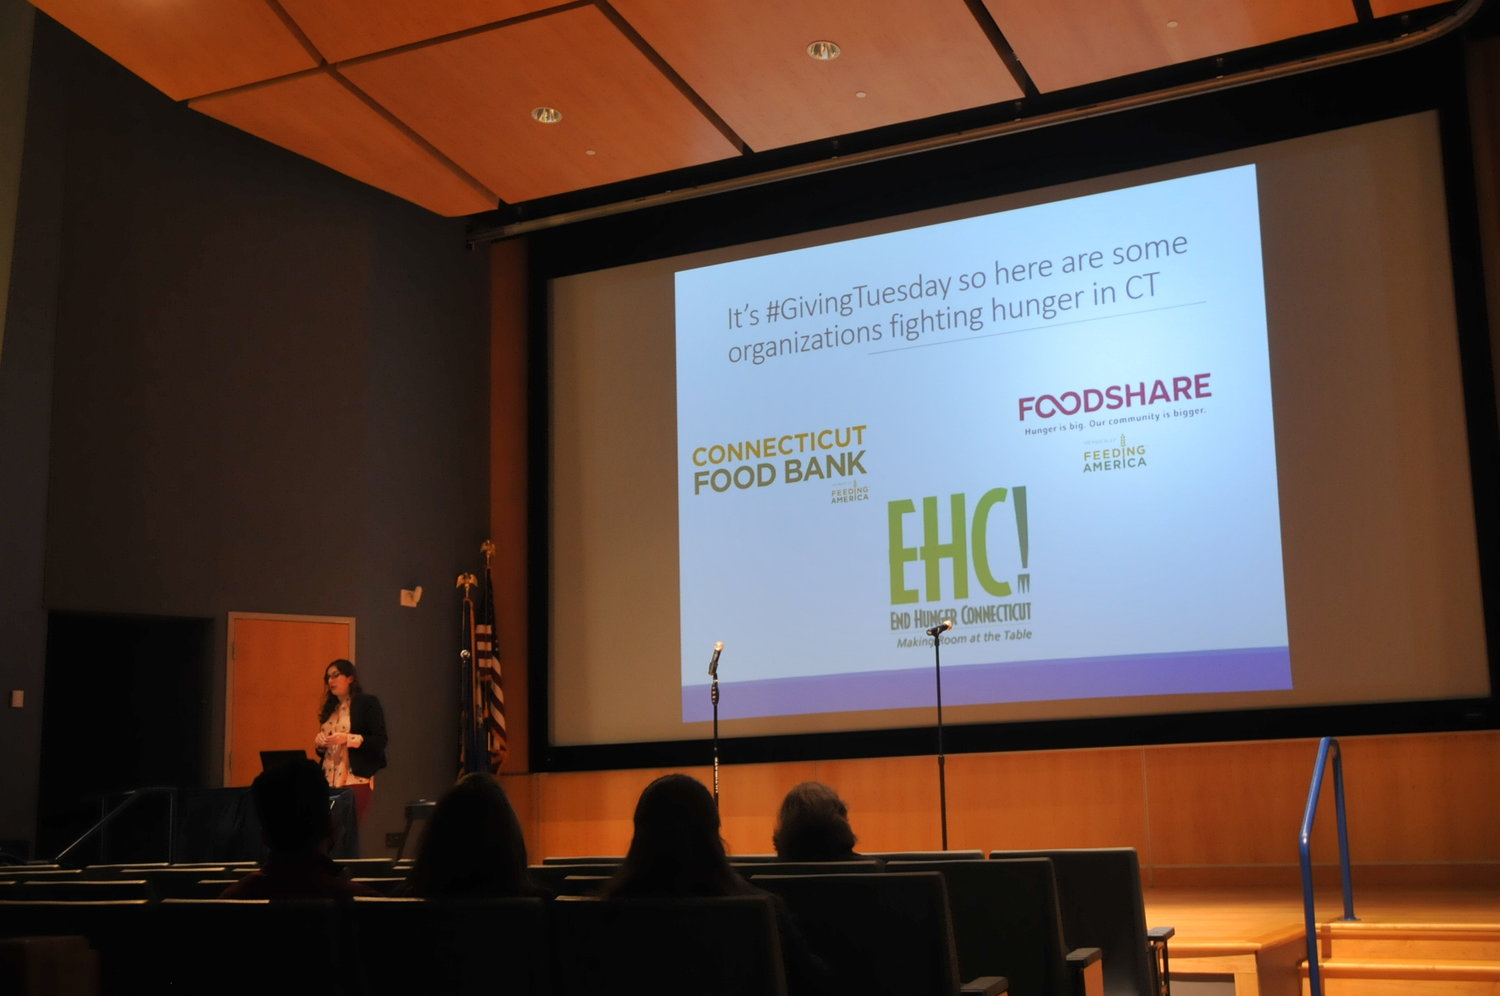 UConn PIRG hosts a Charity Showcase where speakers talk about homelessness and food insecurity in Connecticut. Different performers were also present to support the cause. (Photo by Nicole Jain/The Daily Campus)